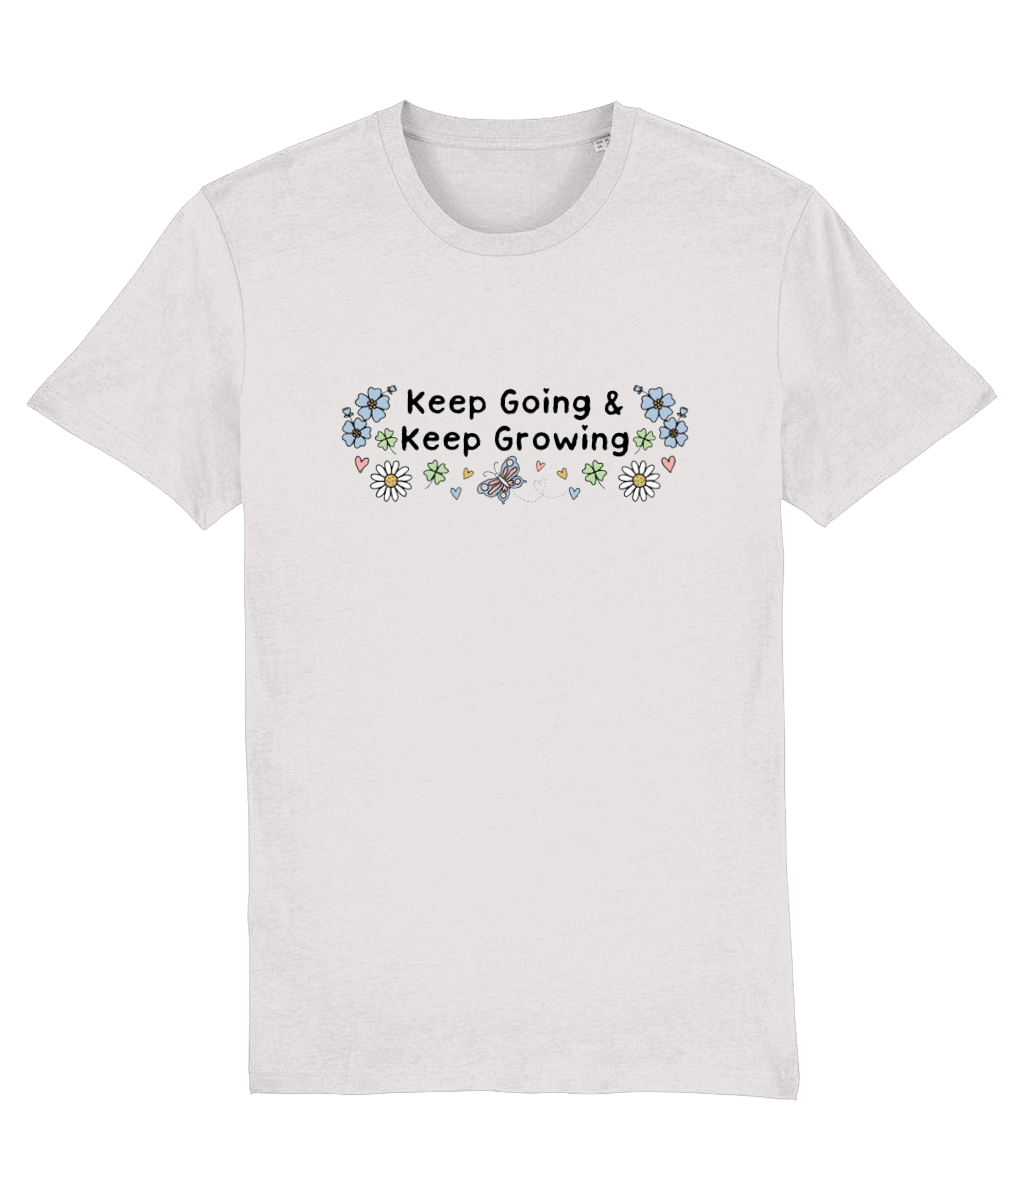 Floral Keep Going & Keep Growing - Adult T-Shirt - Light Multi Colour Available